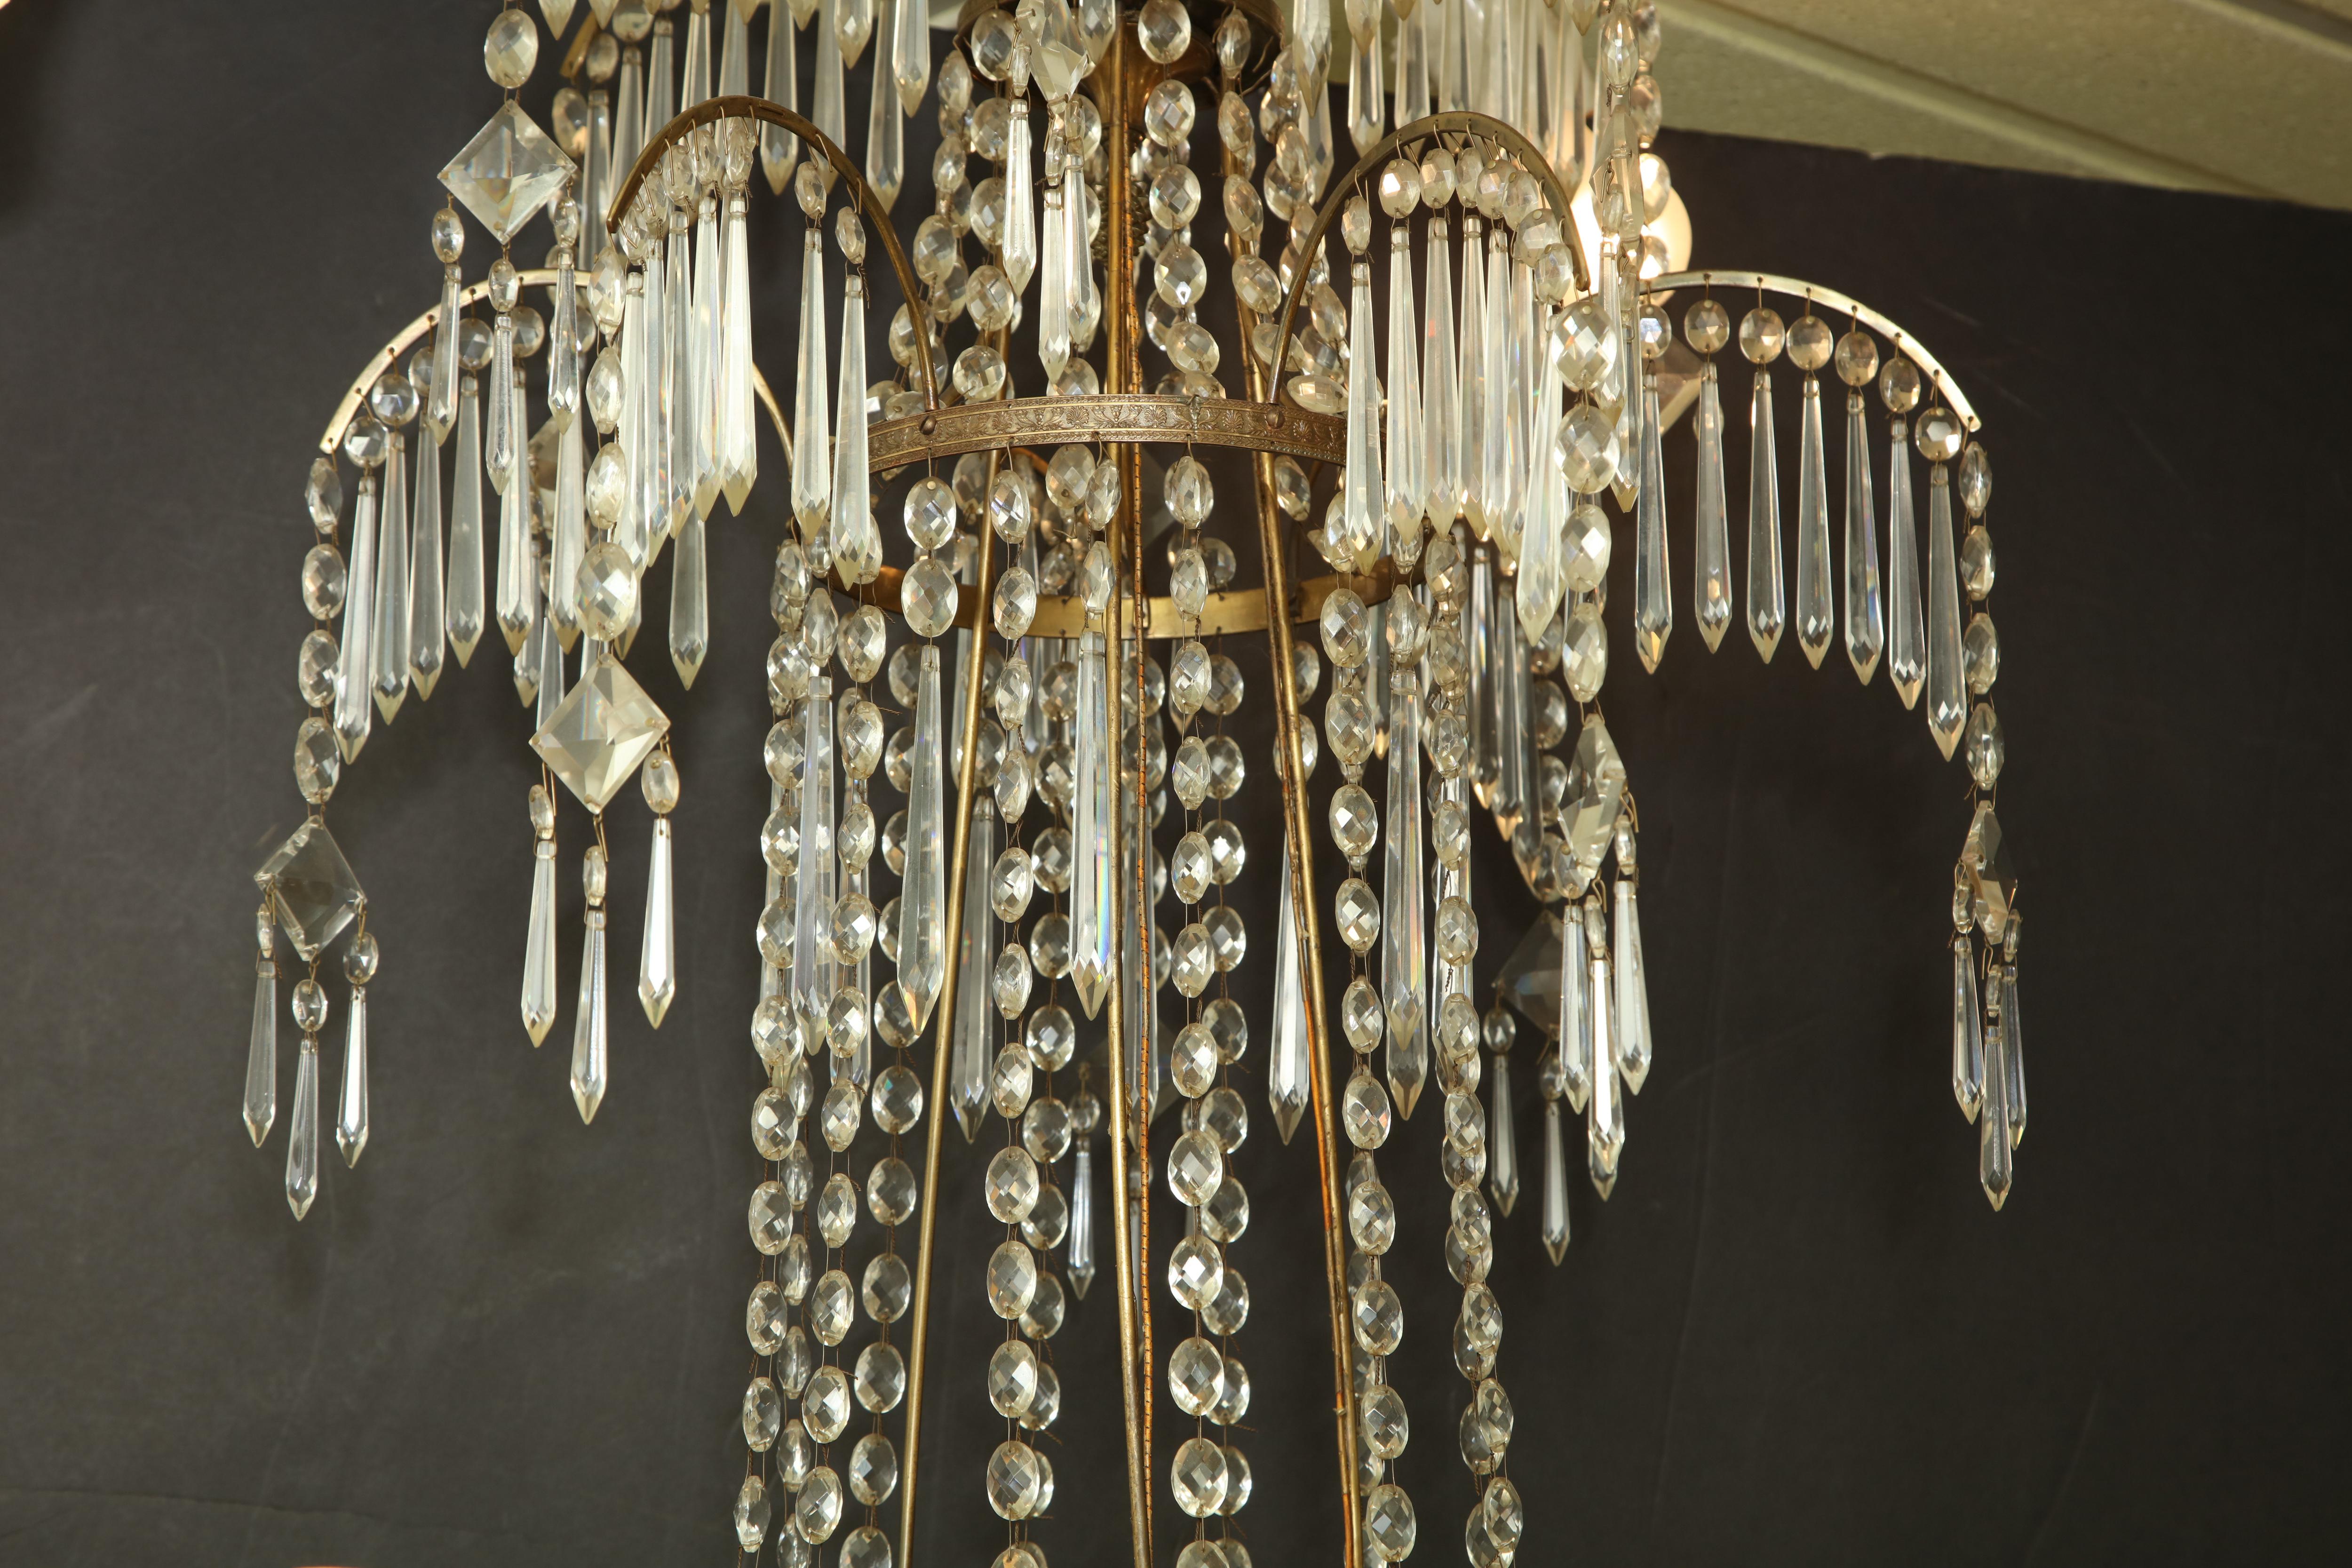 Early 19th Century Swedish Neoclassic Bronze and Crystal Chandelier